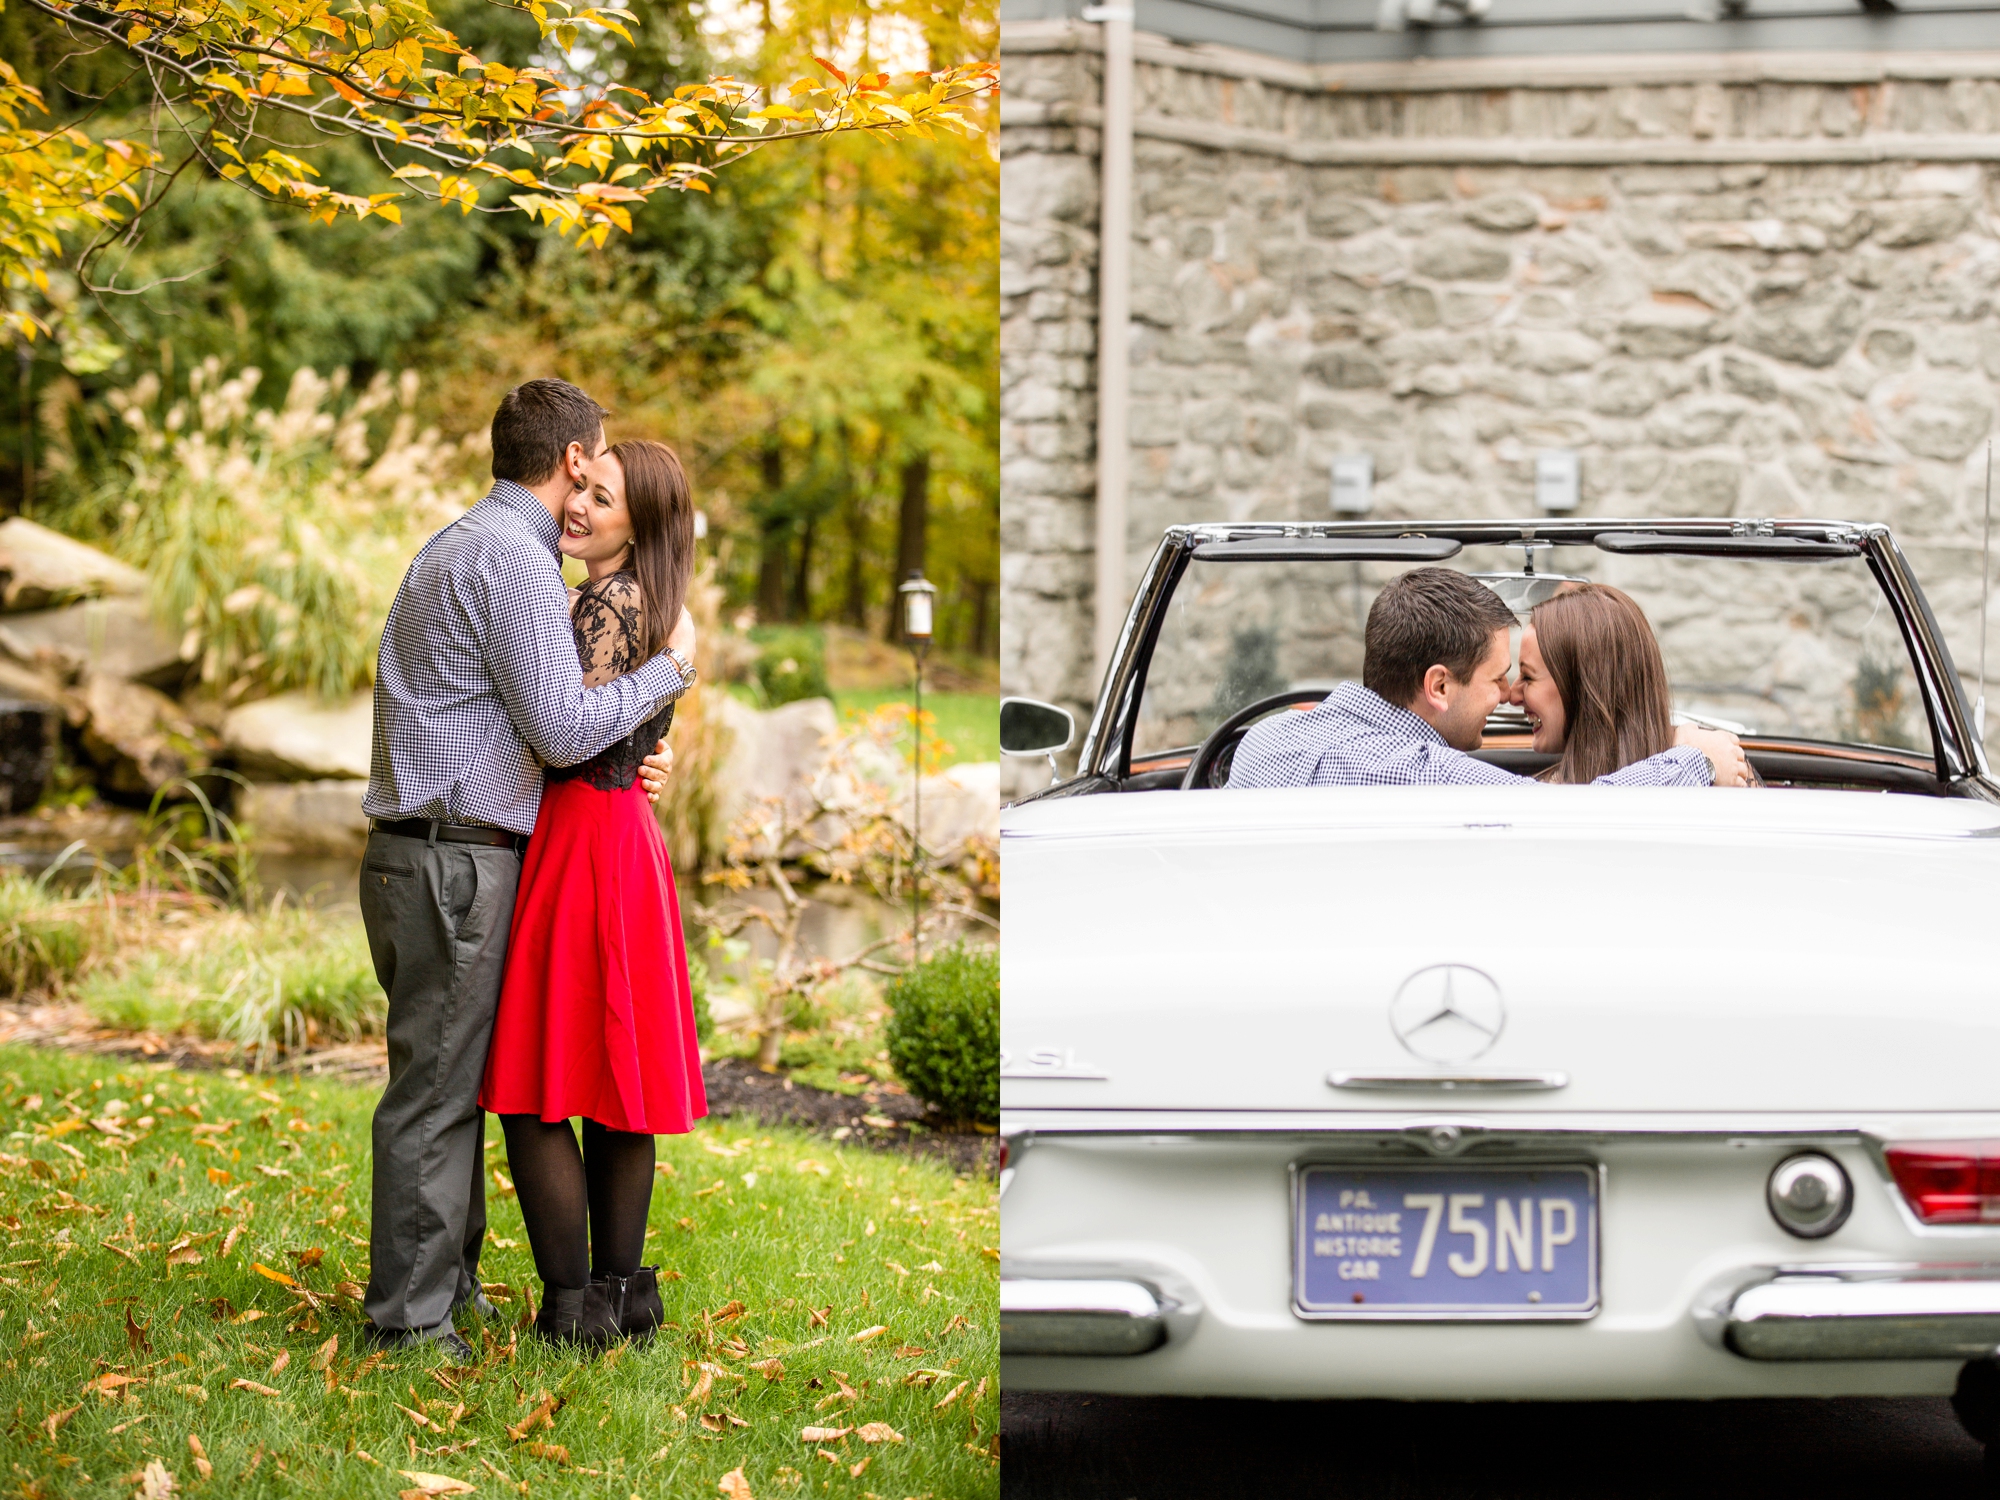 pittsburgh wedding photographer, indiana wedding photographer, best spot in pittsburgh for photo shoot, indiana pa engagement pictures, pittsburgh engagement photos